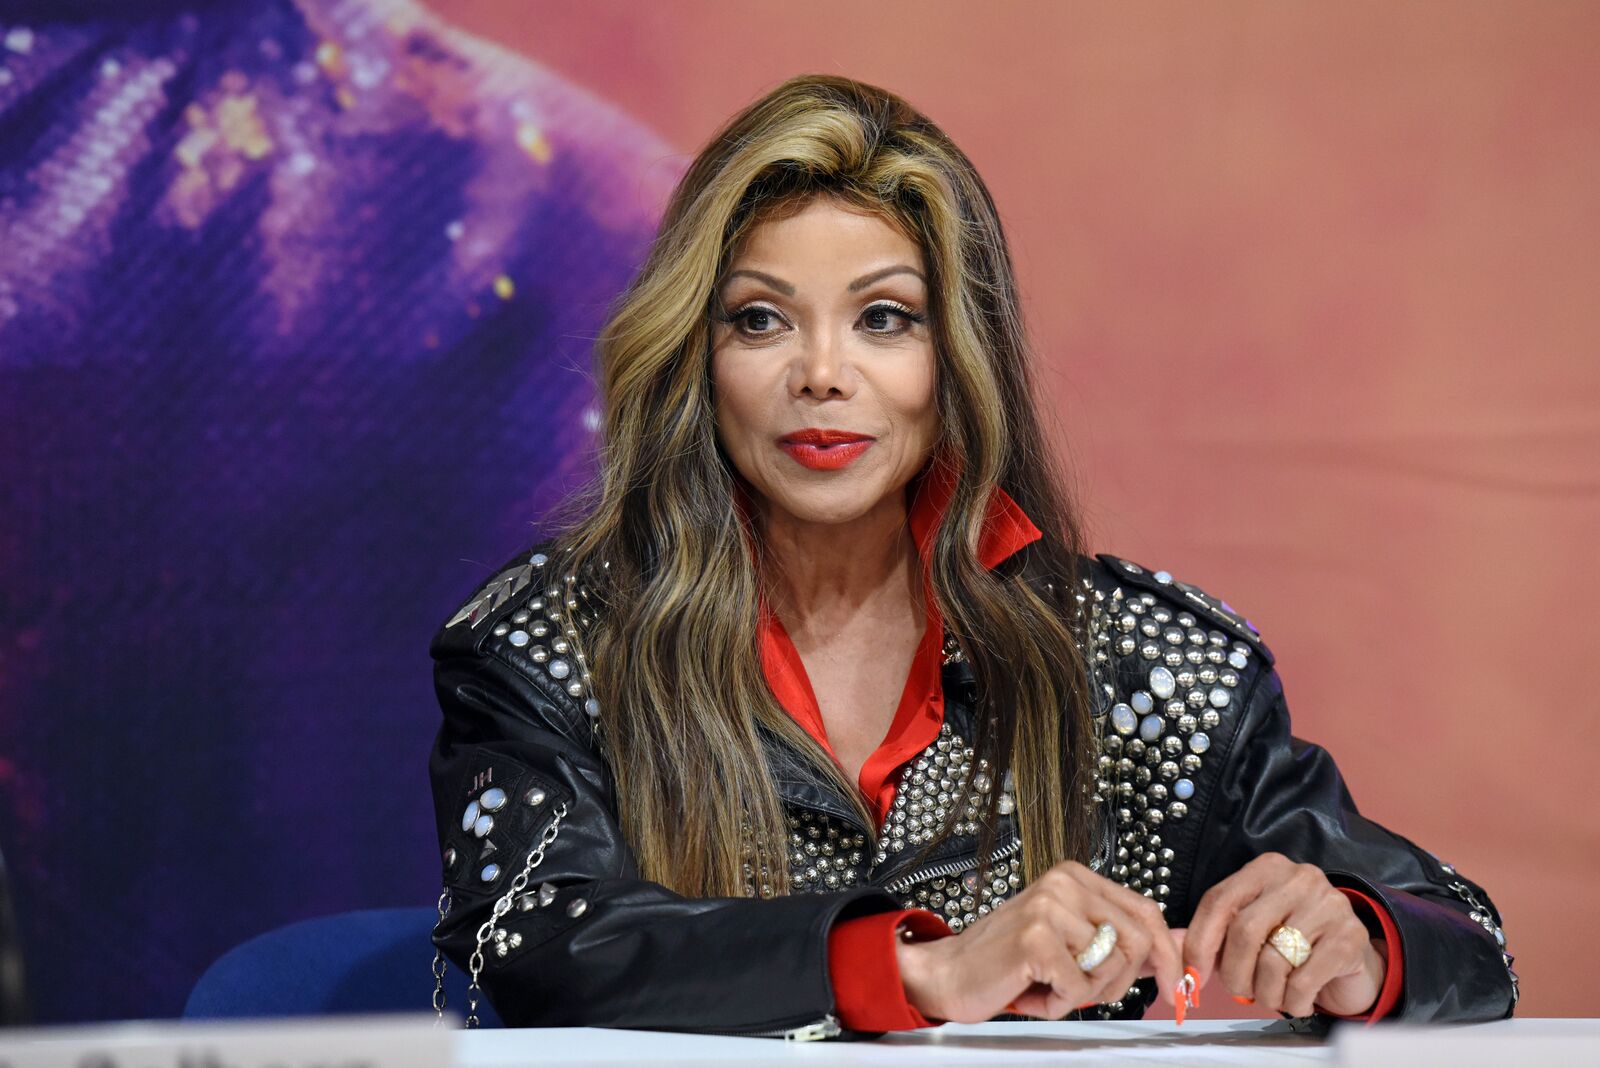 US singer La Toya Jackson attends a press conference to present the 'Forever - King Of Pop' show on October 22, 2018 | Photo: Getty Images